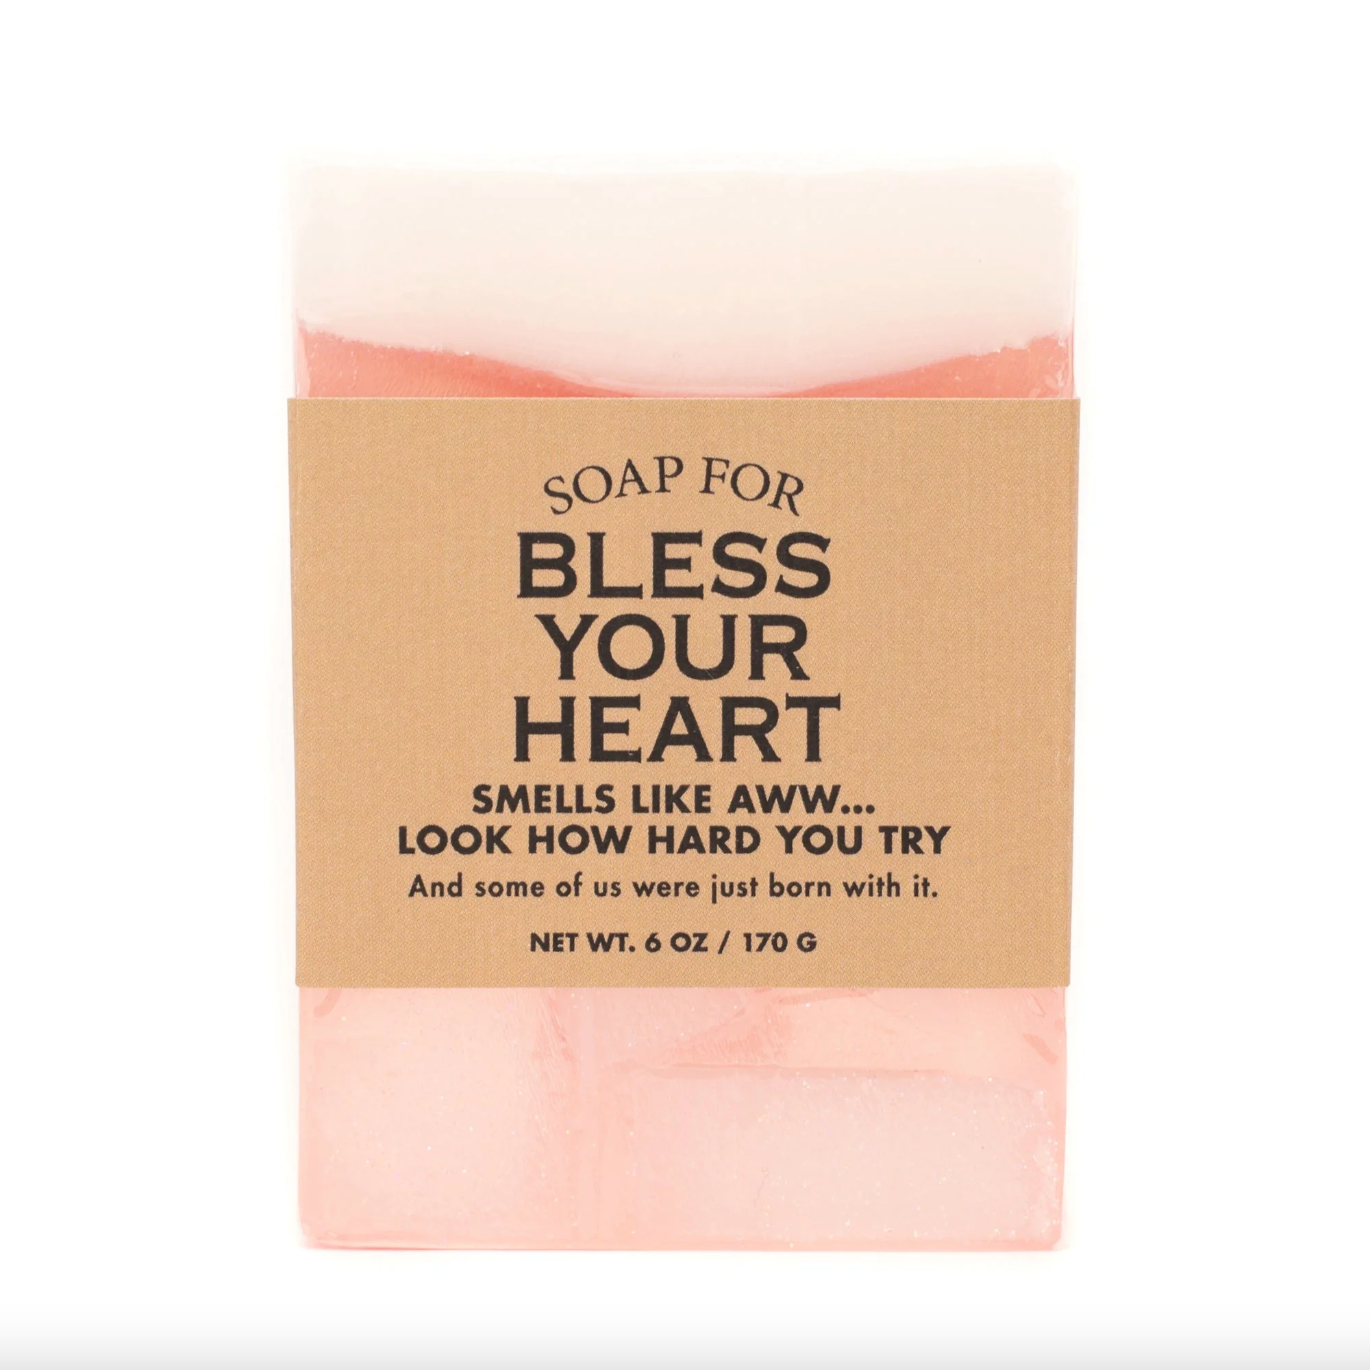 Soap for Bless Your Heart - Heart of the Home LV